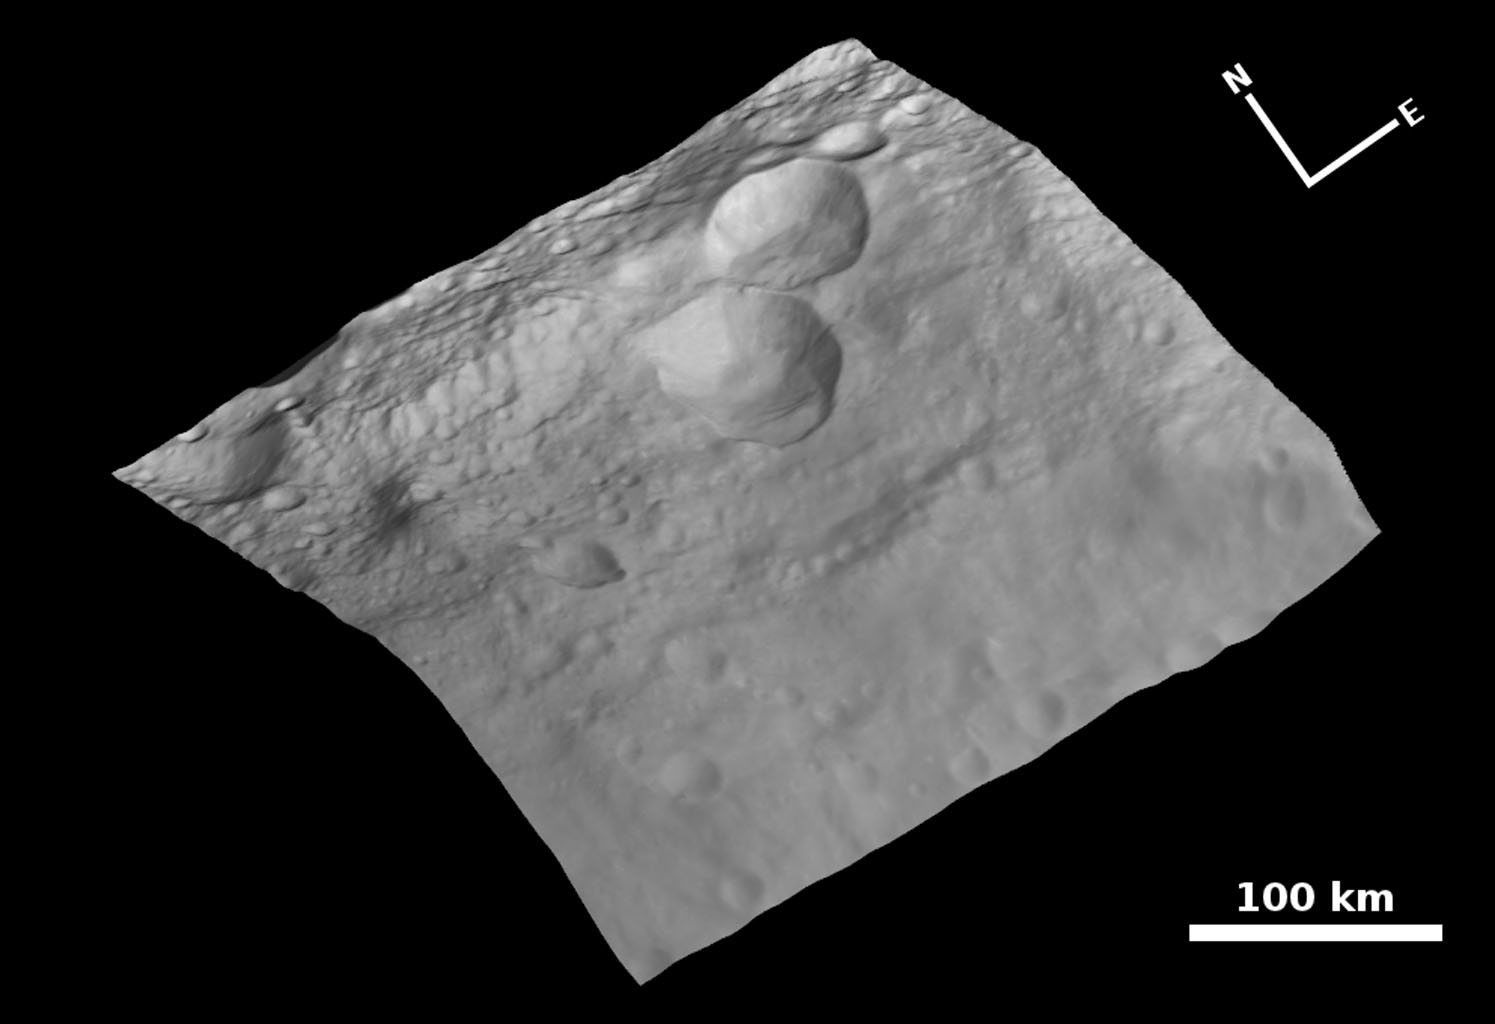 Topography of Vesta's Surface